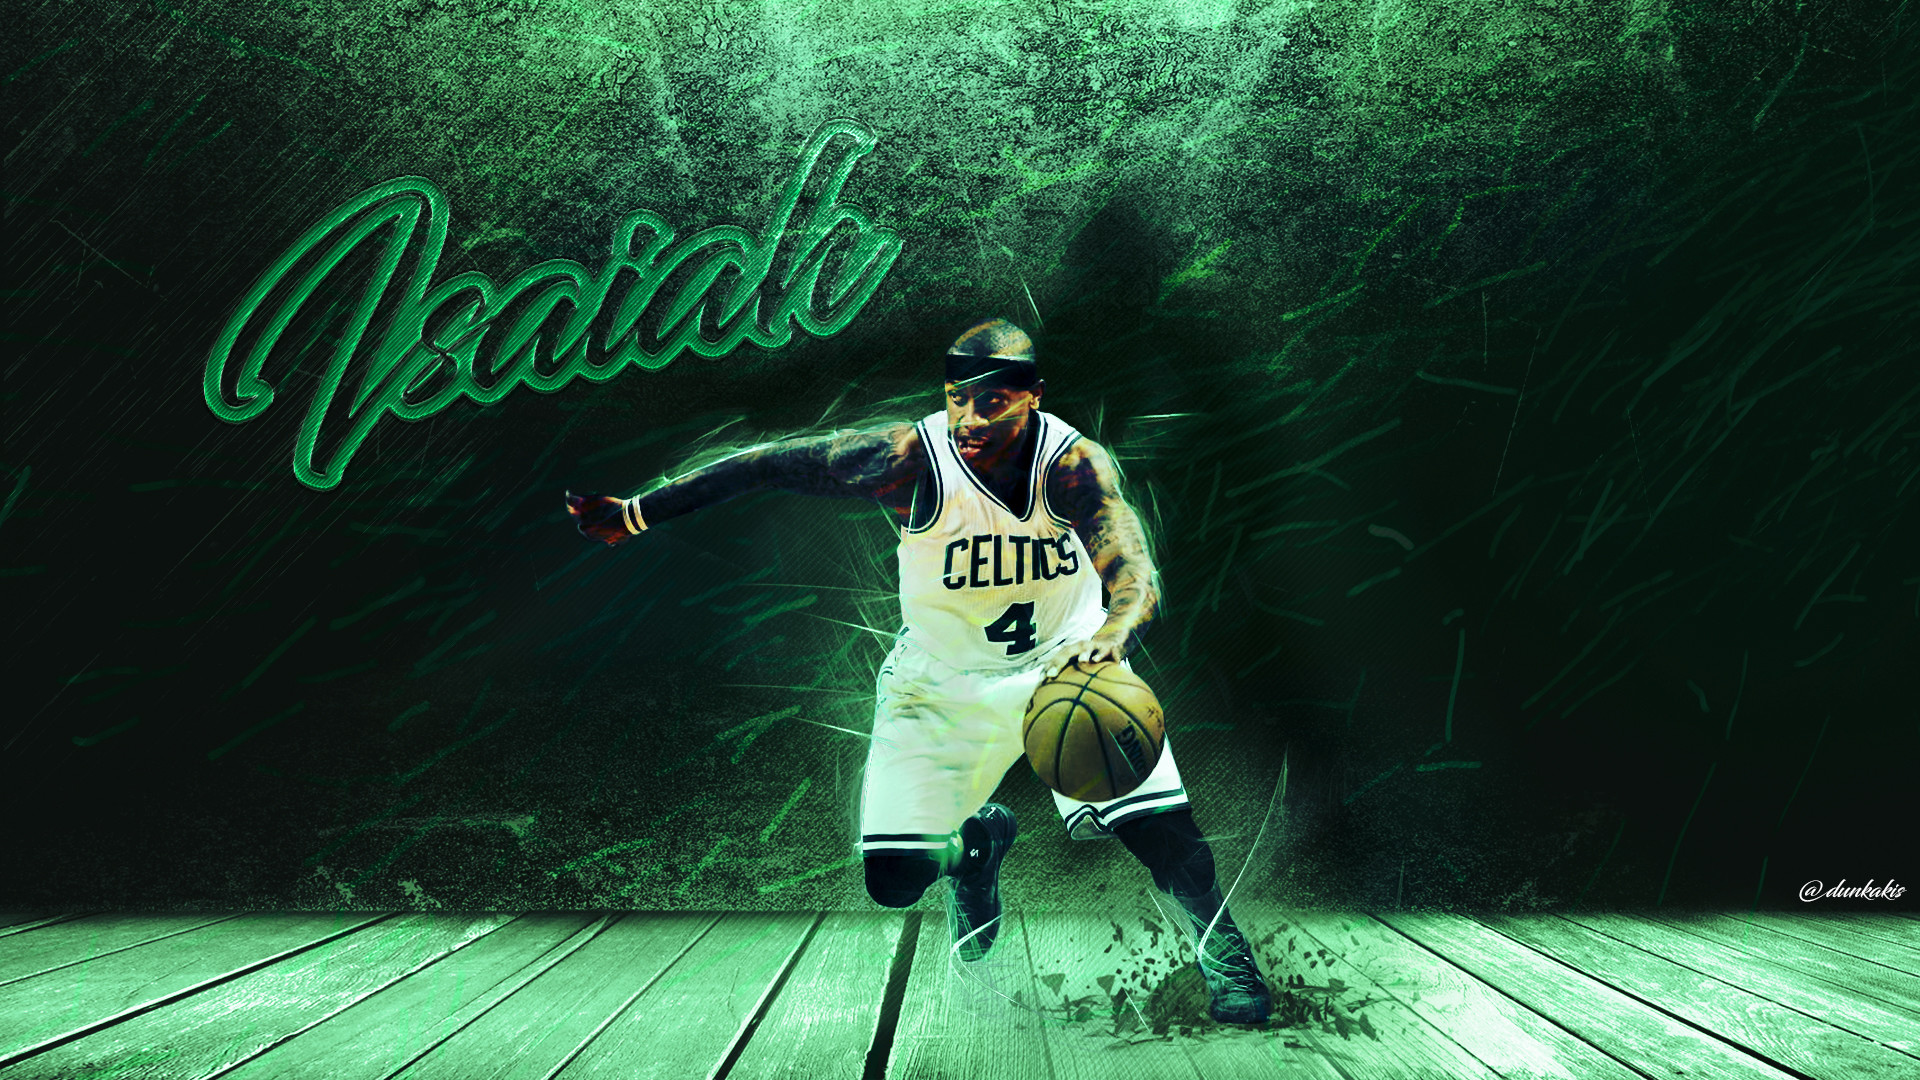 1920x1080 isiah thomas celtics wallpaper - photo #3. THE 3638323 TO 1605548 A 1450464  OF 1443430 AND 1443154